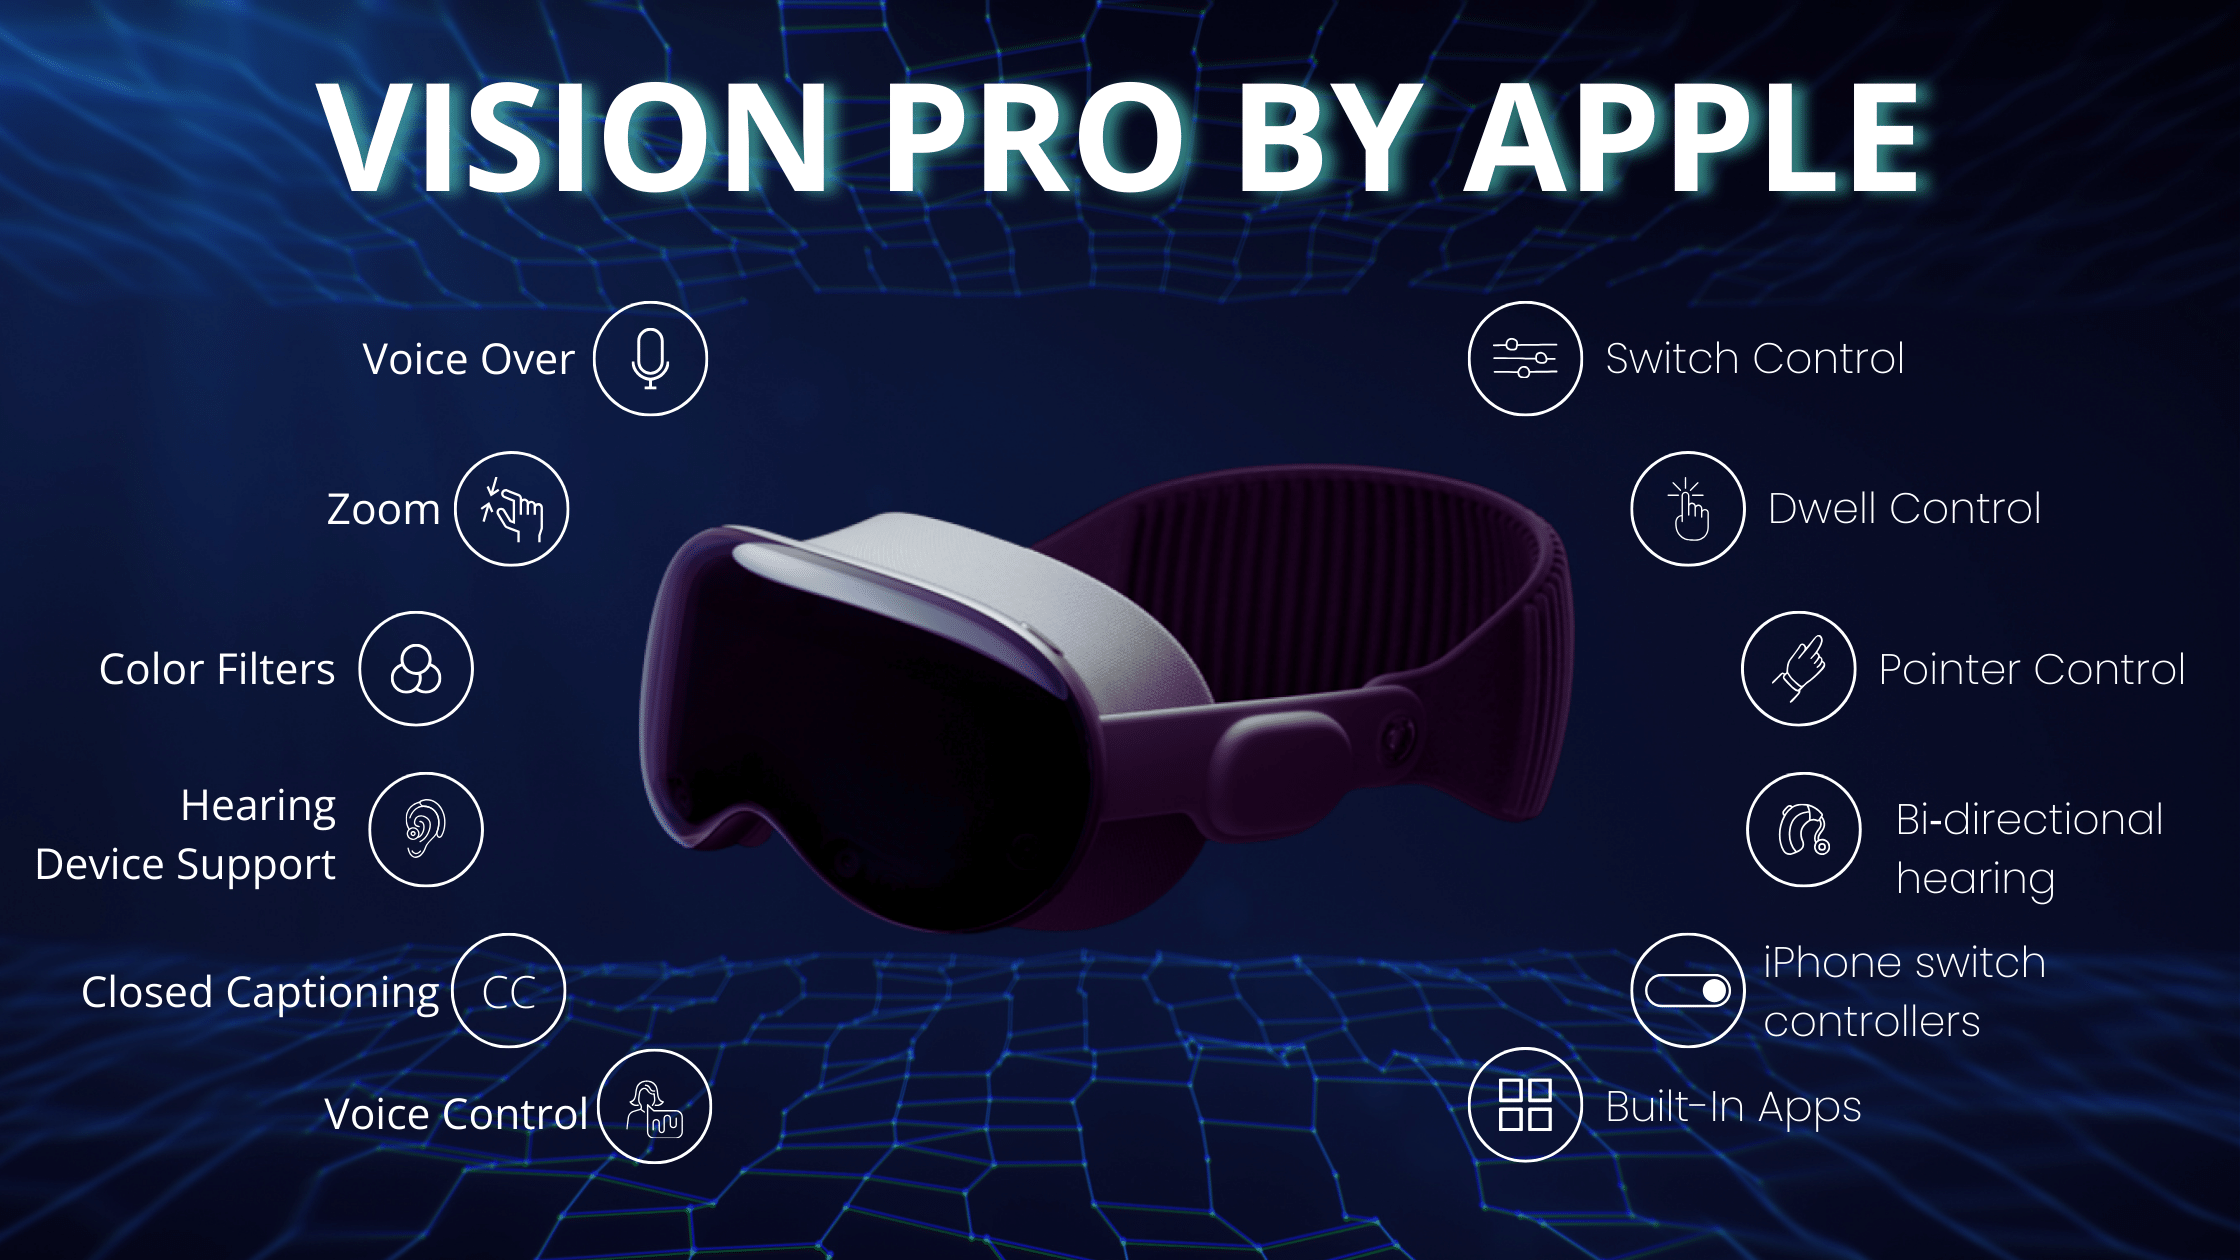 Vision Pro by Apple